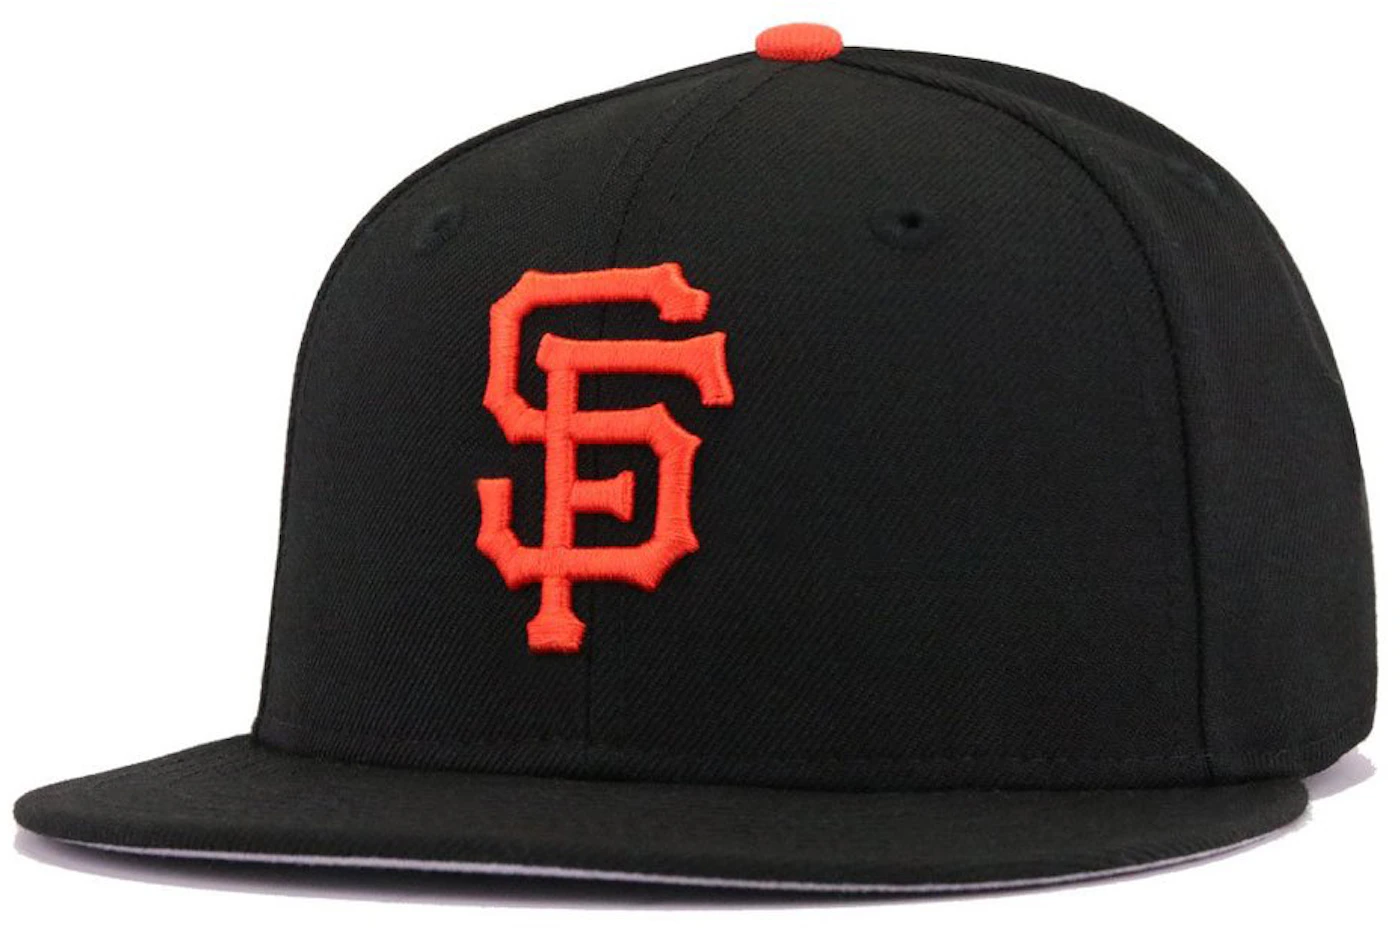 New Era San Francisco Giants Upside Down 59FIFTY Fitted Hat Black